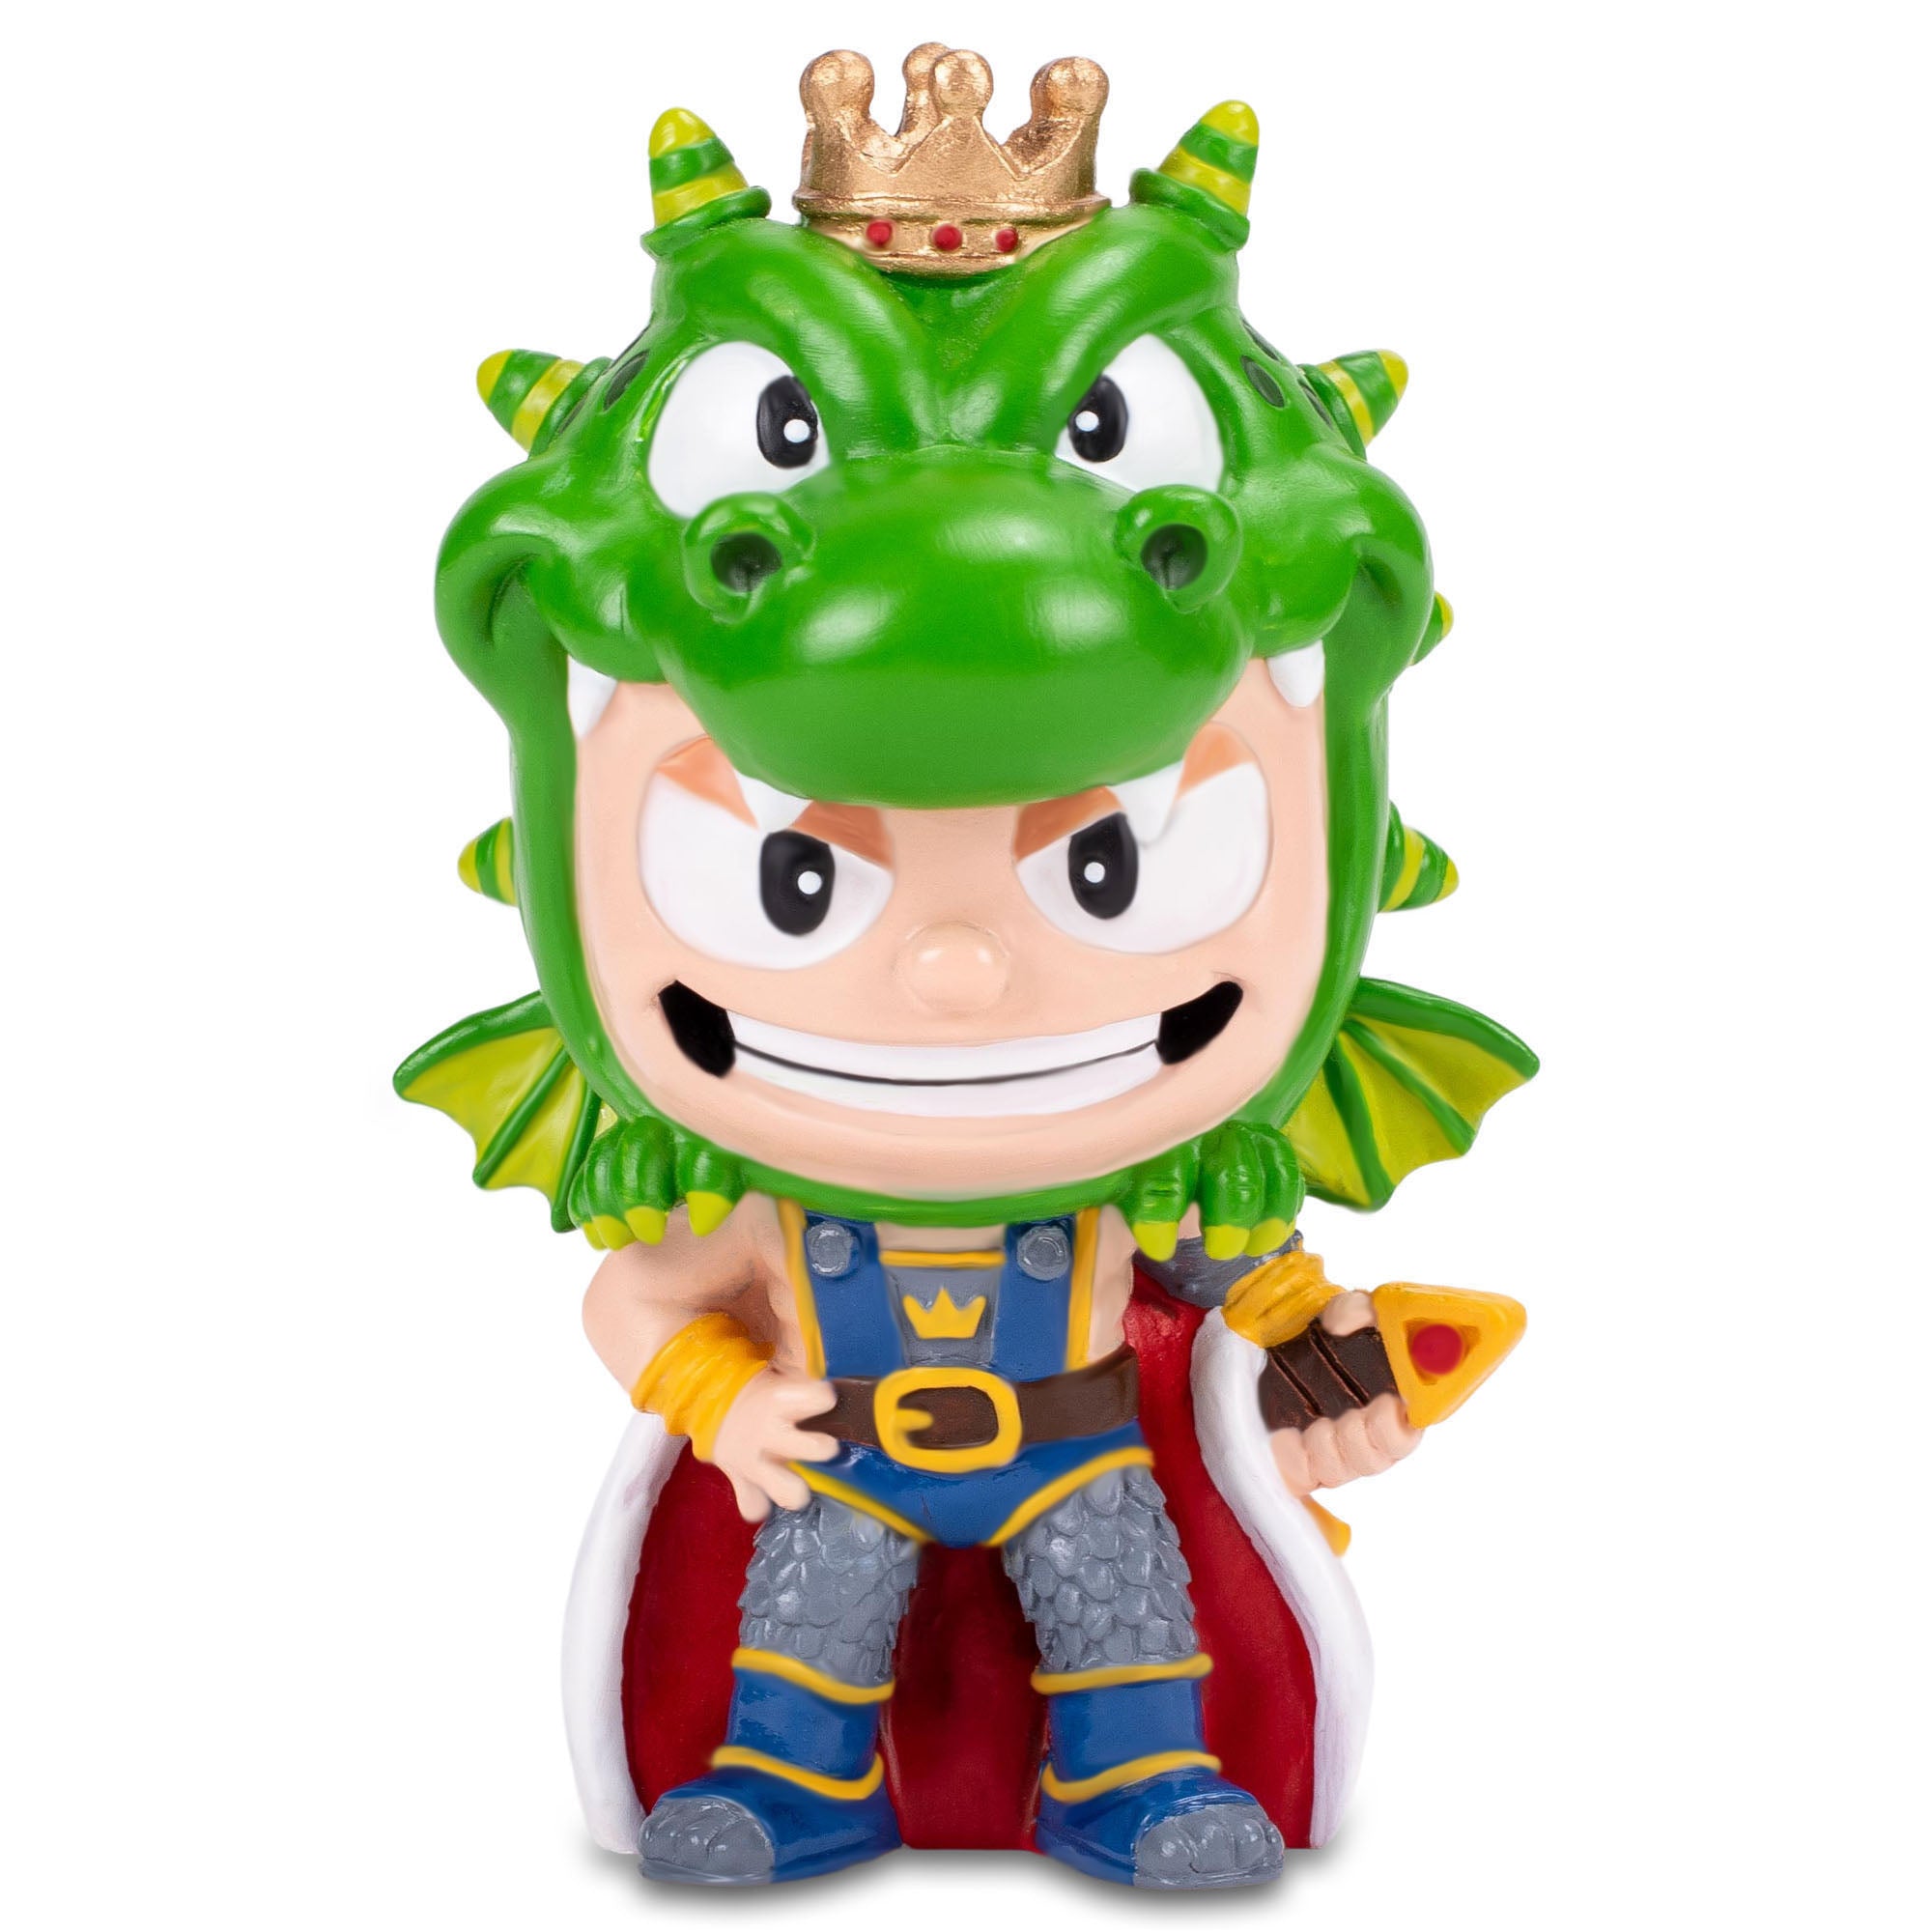 Front angle of legendary King of Camelot, Arthur Pendragon, action figure with a crown and a dragon hat and cloak of emerald green.